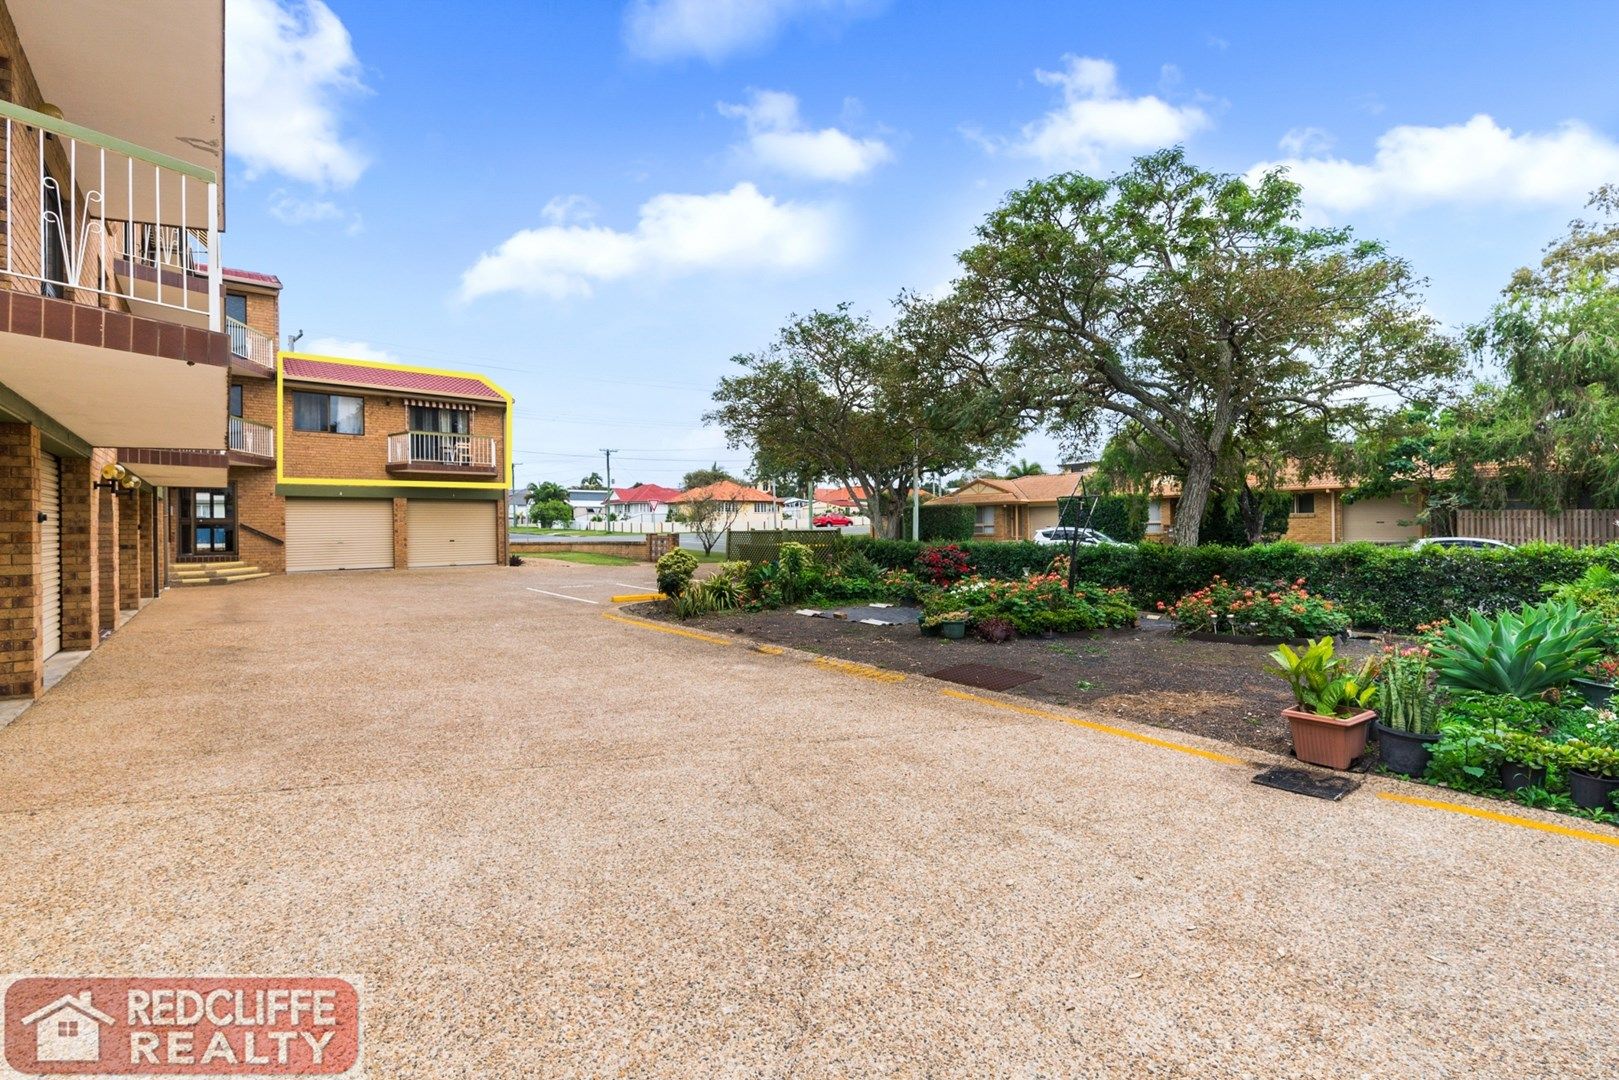 2/37 Grant Street, Redcliffe QLD 4020, Image 0